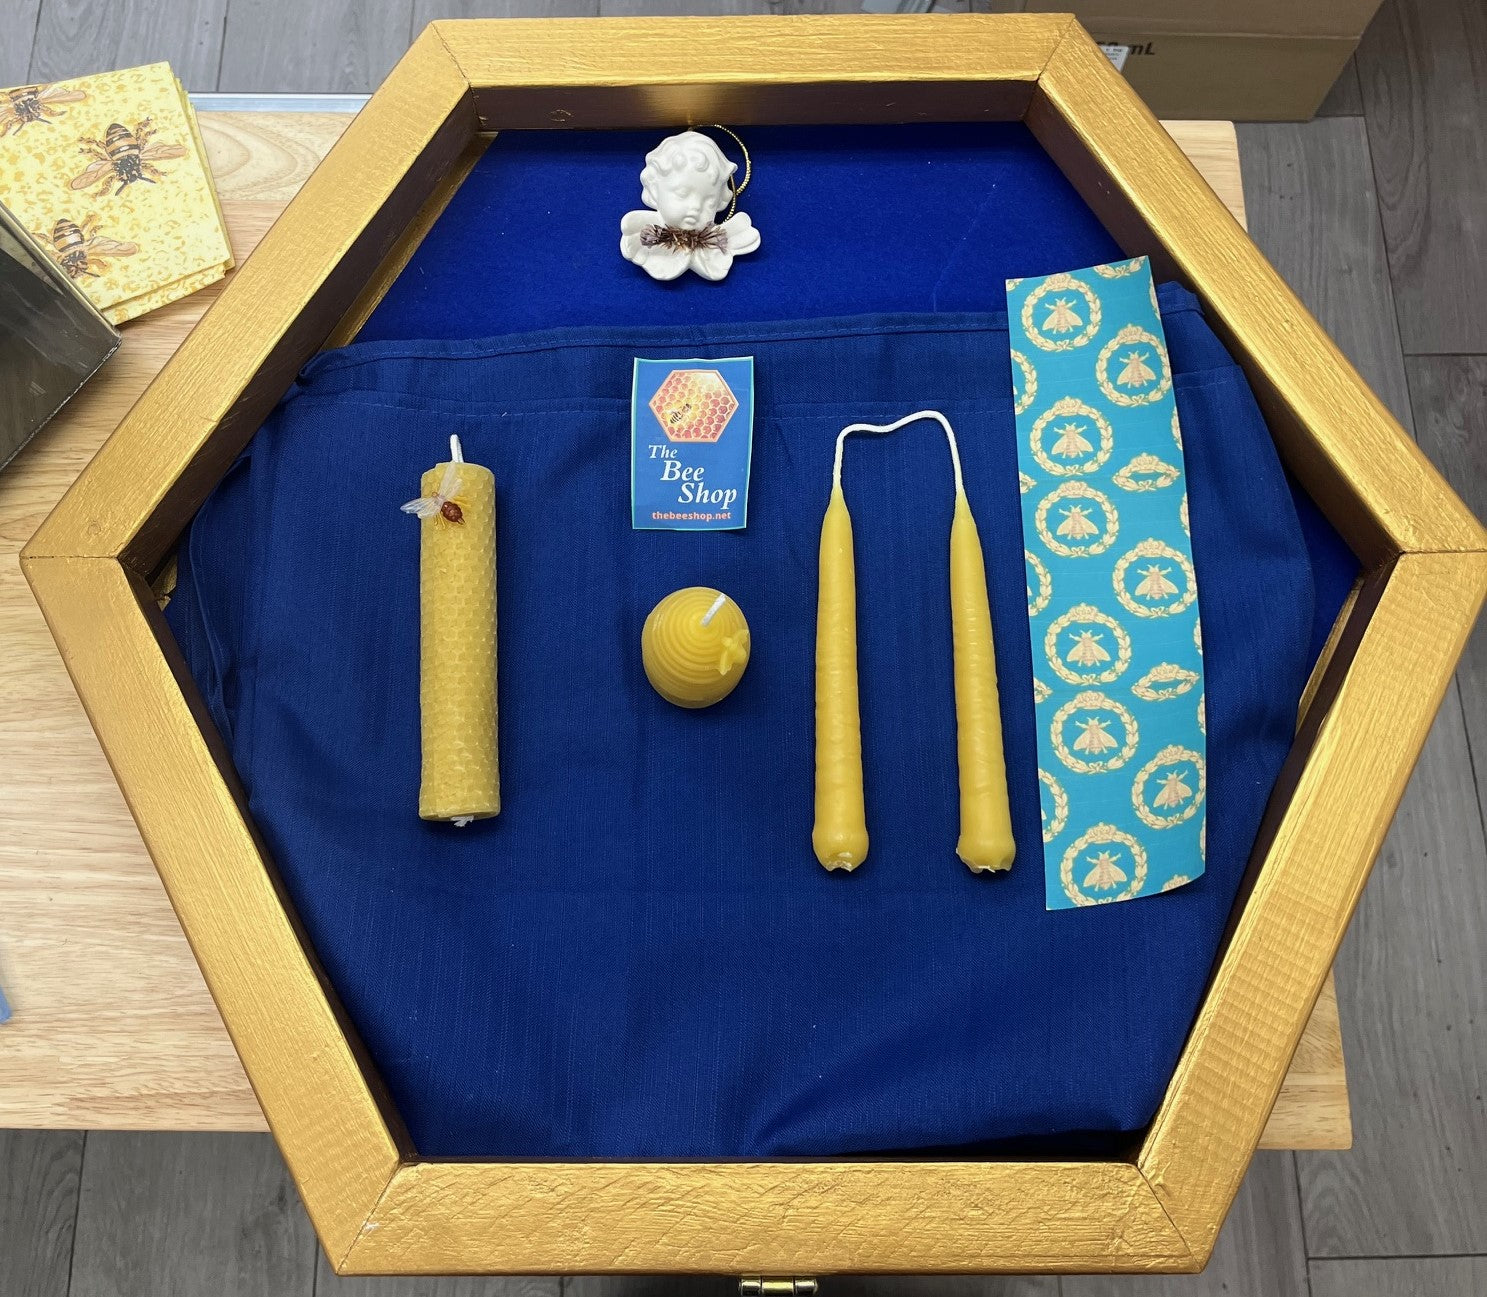 display of the 4 x 100 % pure beeswax candles that you get to make and keep from The Bee Shop&